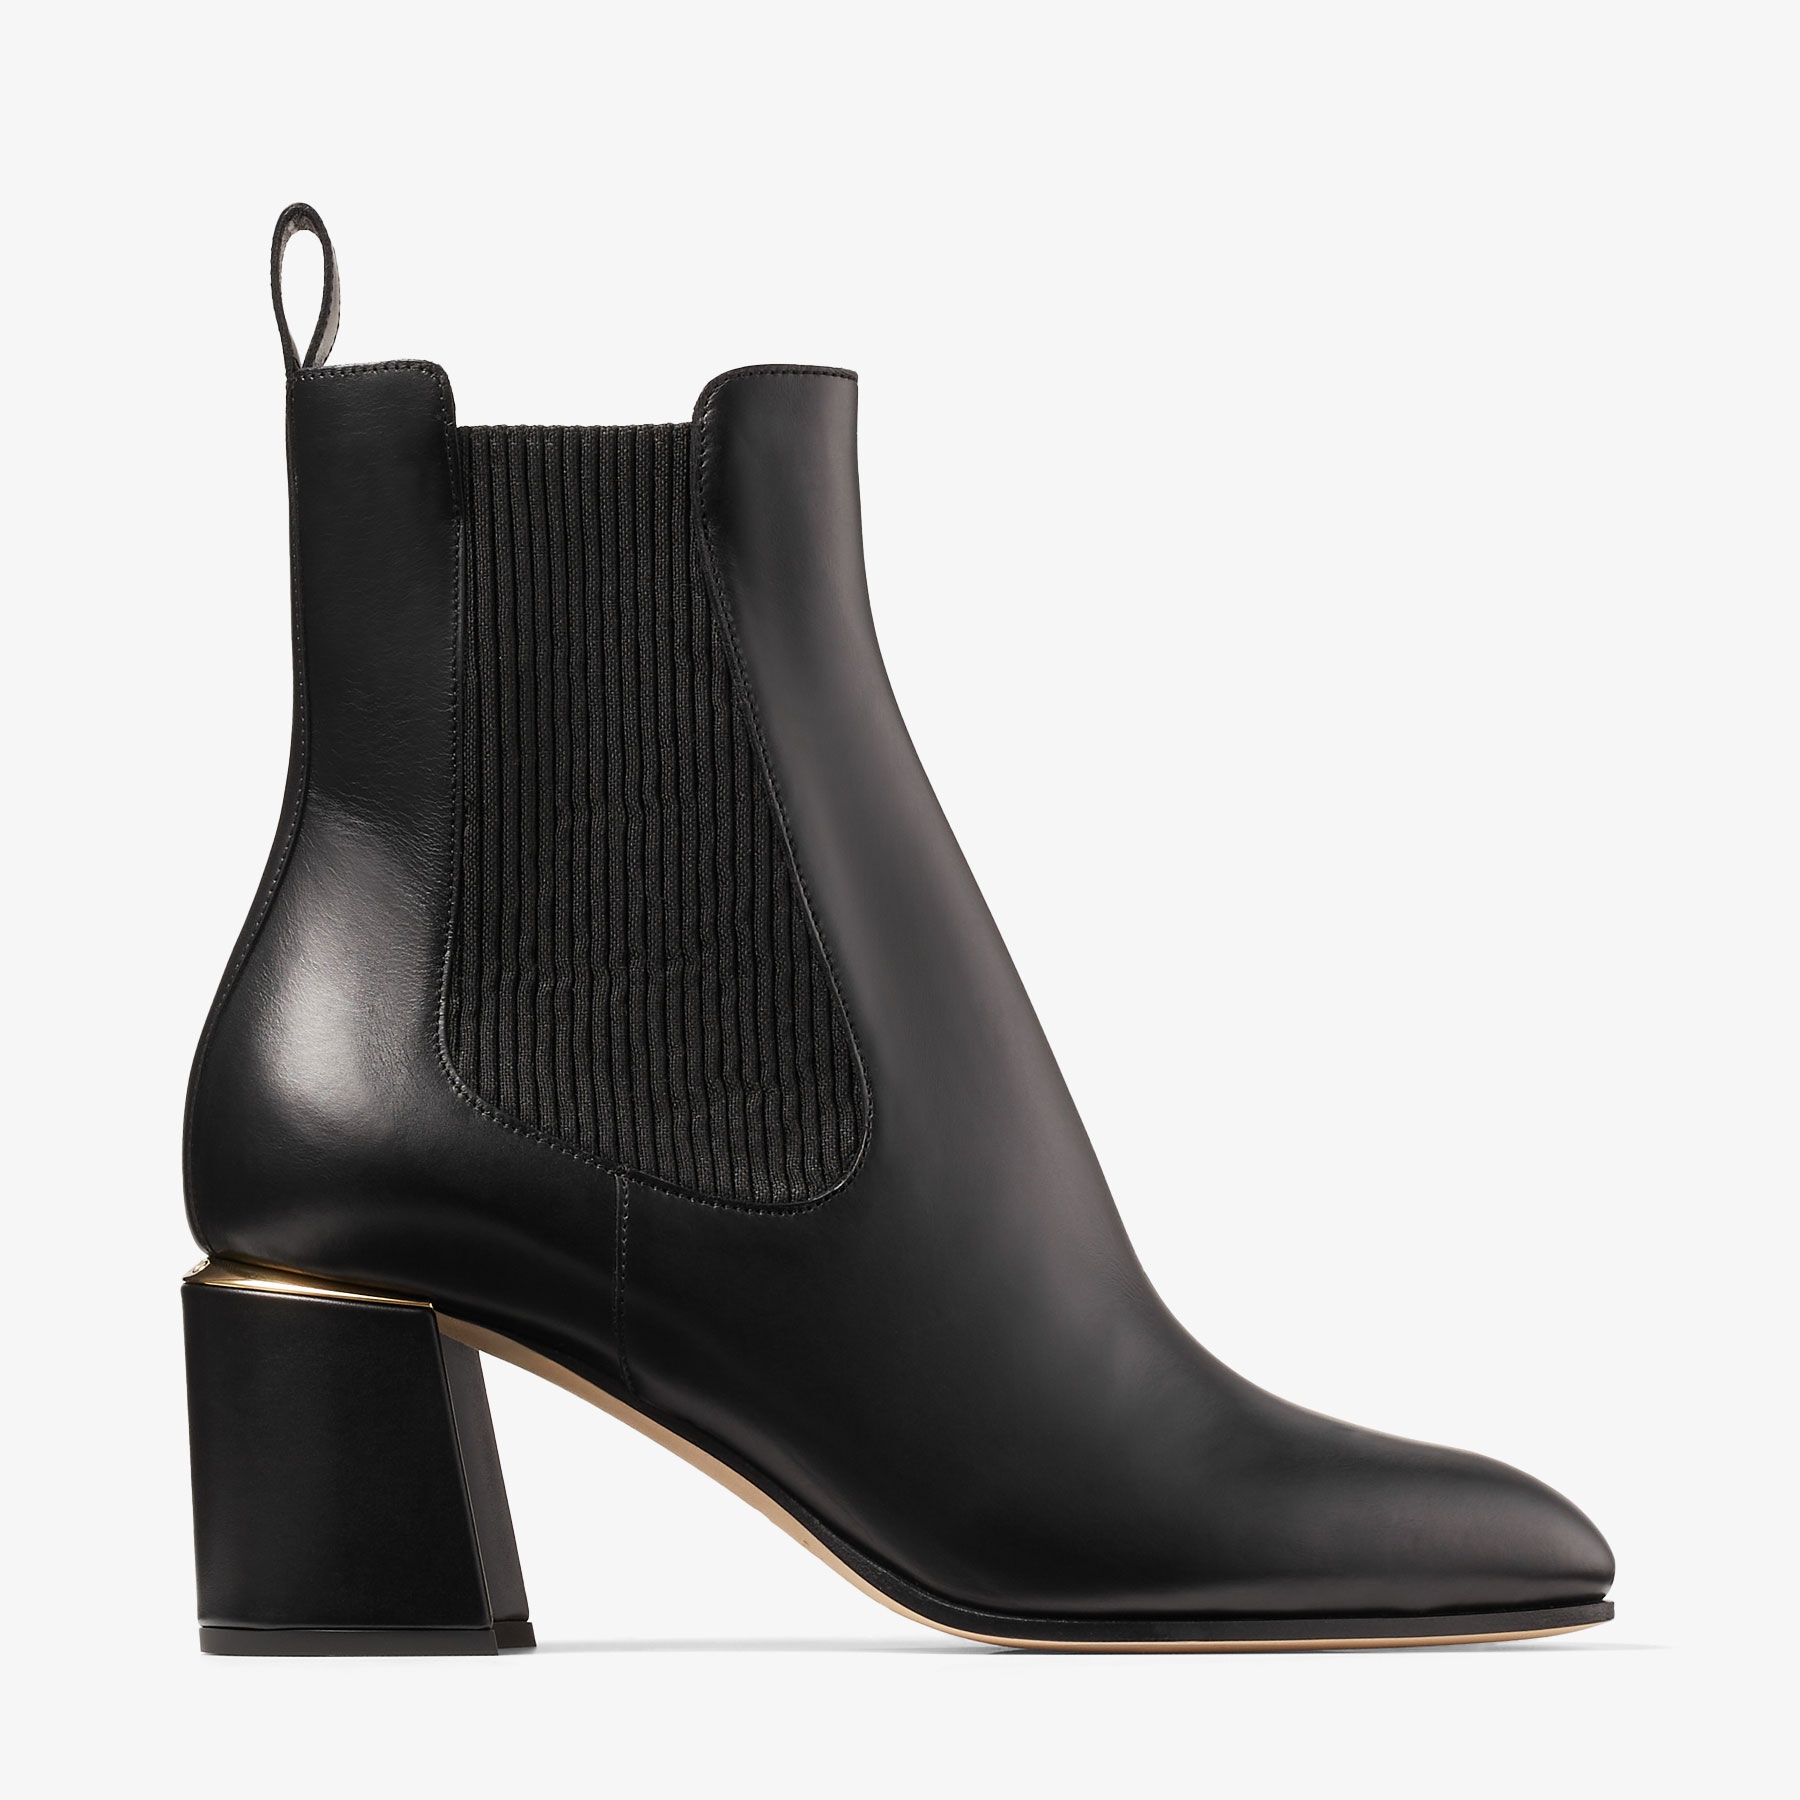 Thessaly 65
Black Leather Ankle Boots - 1